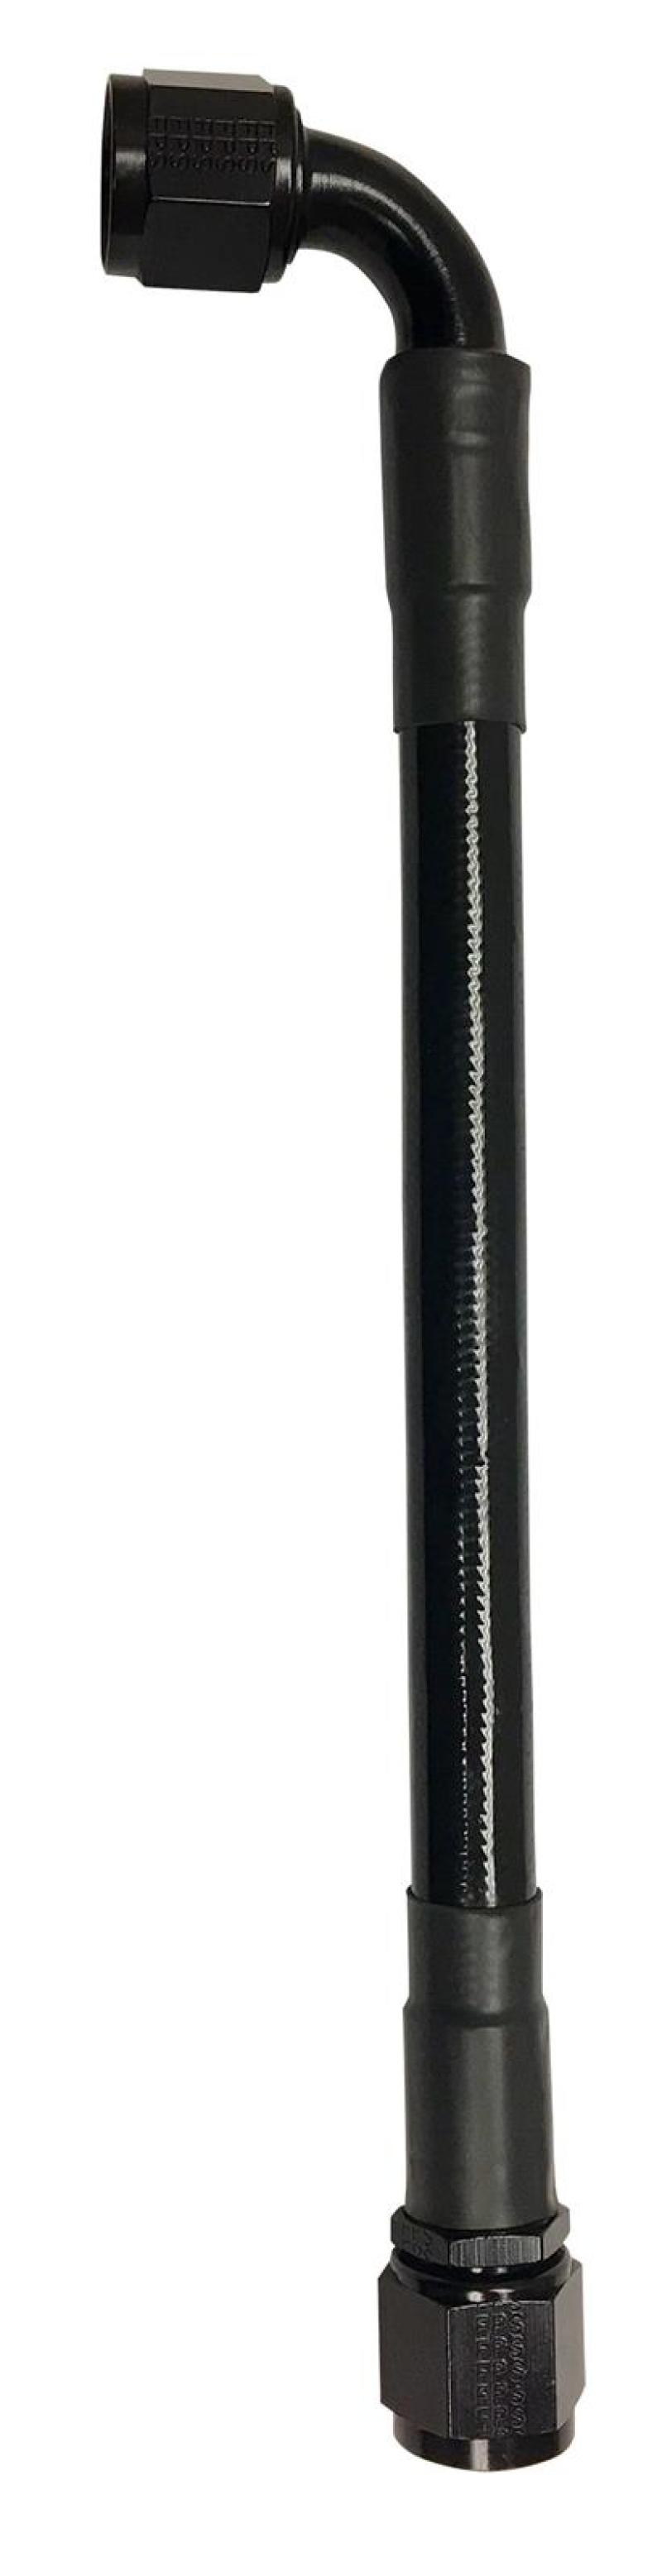 Fragola -10AN Ext Black PTFE Hose Assembly Straight x 90 Degree 20in - 6029-1-2-20BL